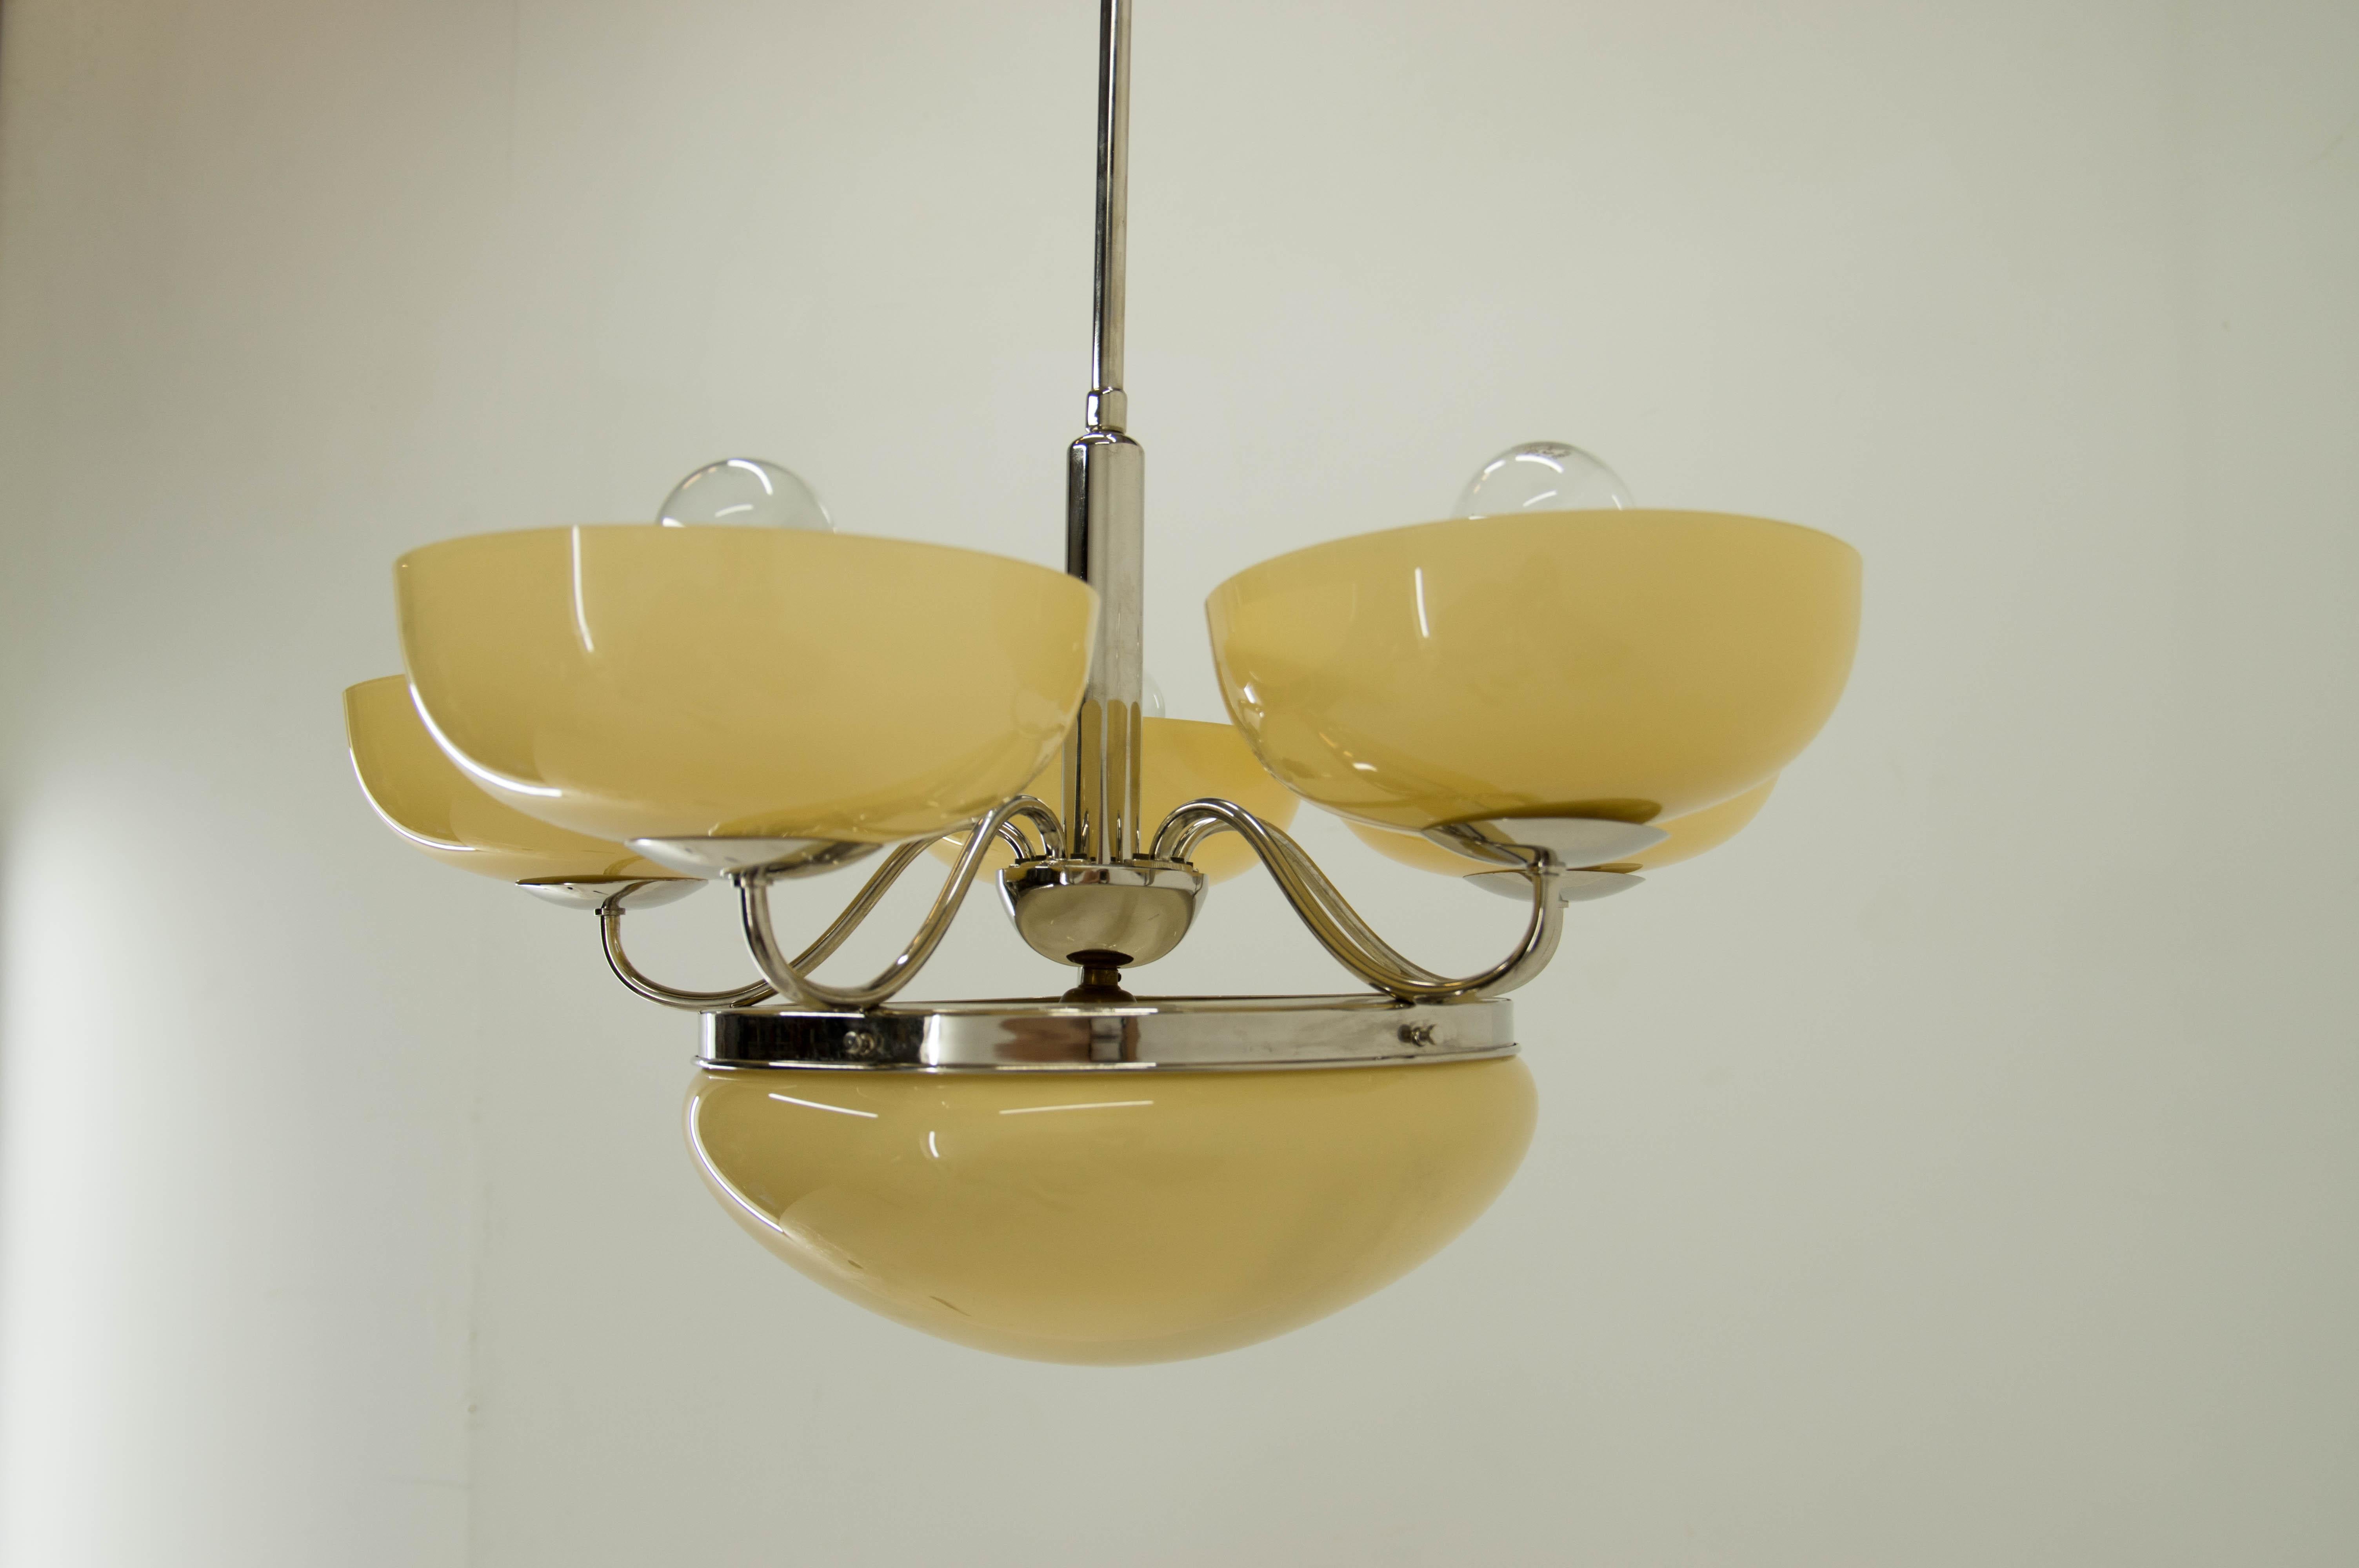 Large Art Deco Chandelier in Excellent Condition, 1930s For Sale 3